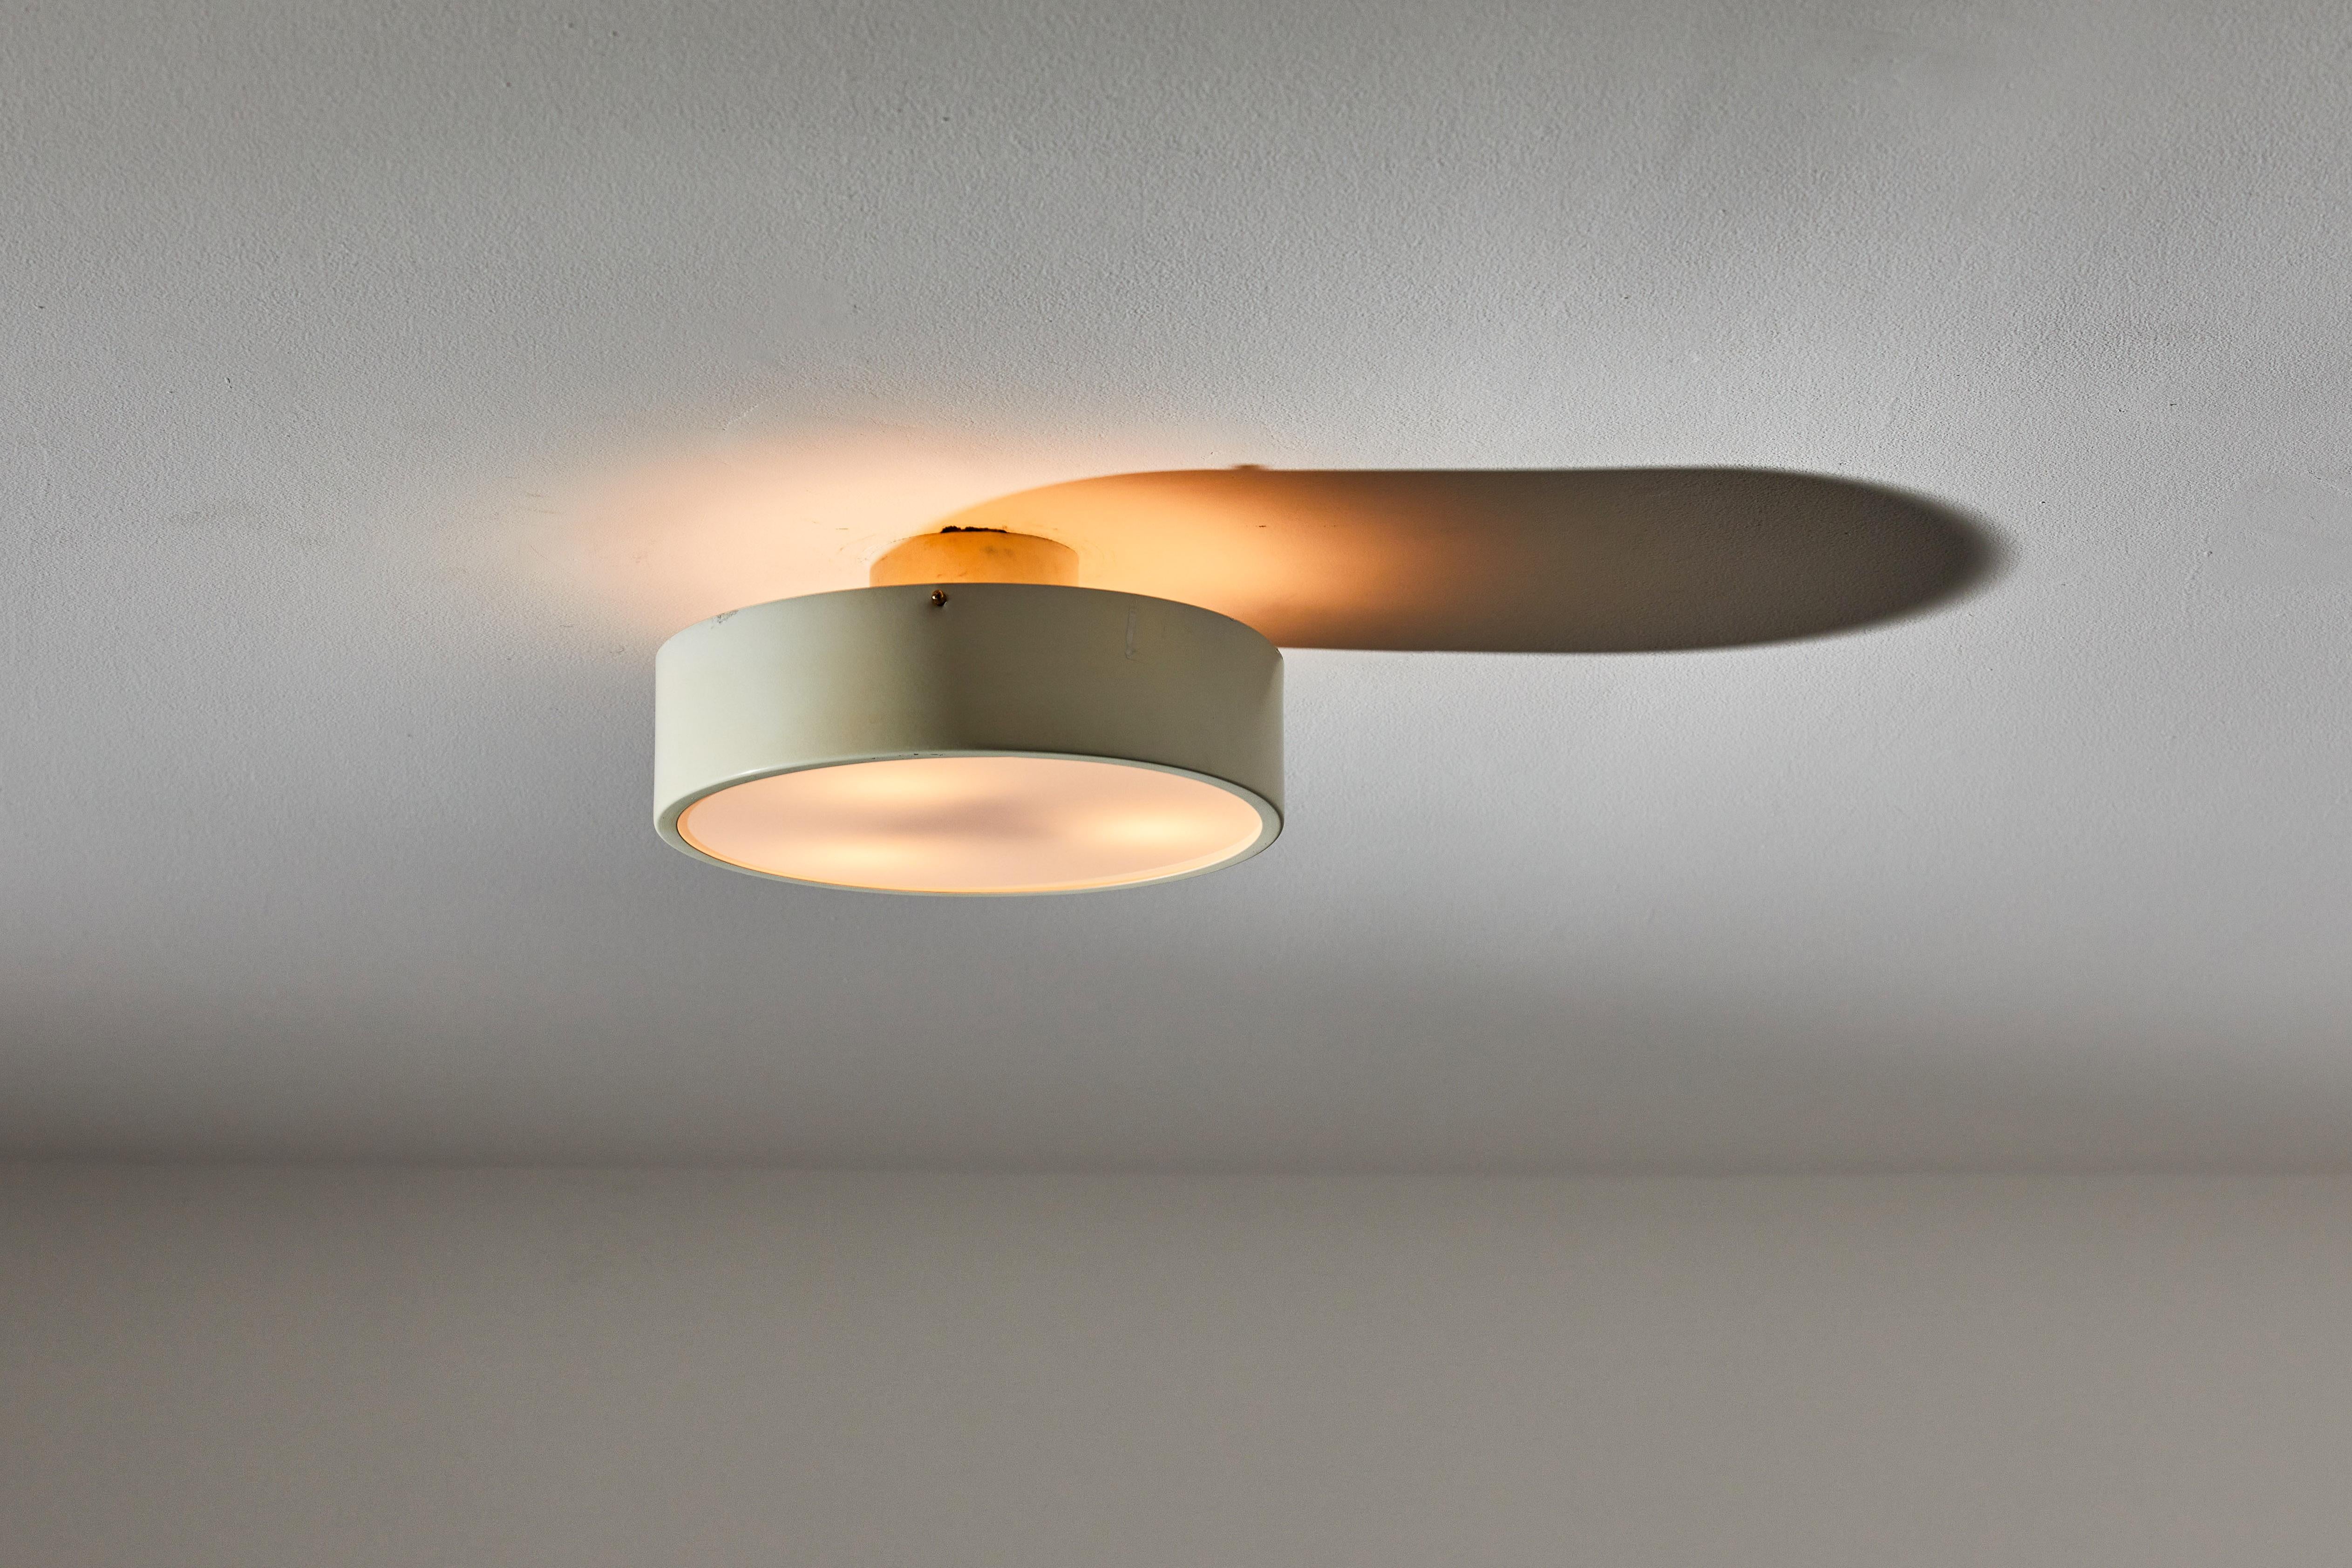 One Model 450 ceiling light by Tito Agnoli for Oluce. Designed and manufactured in Italy, circa 1960s. Original painted aluminum, frosted moulded glass, brass hardware. Rewired for U.S. standards. We recommend 3 E14 40w maximum bulbs per fixture.